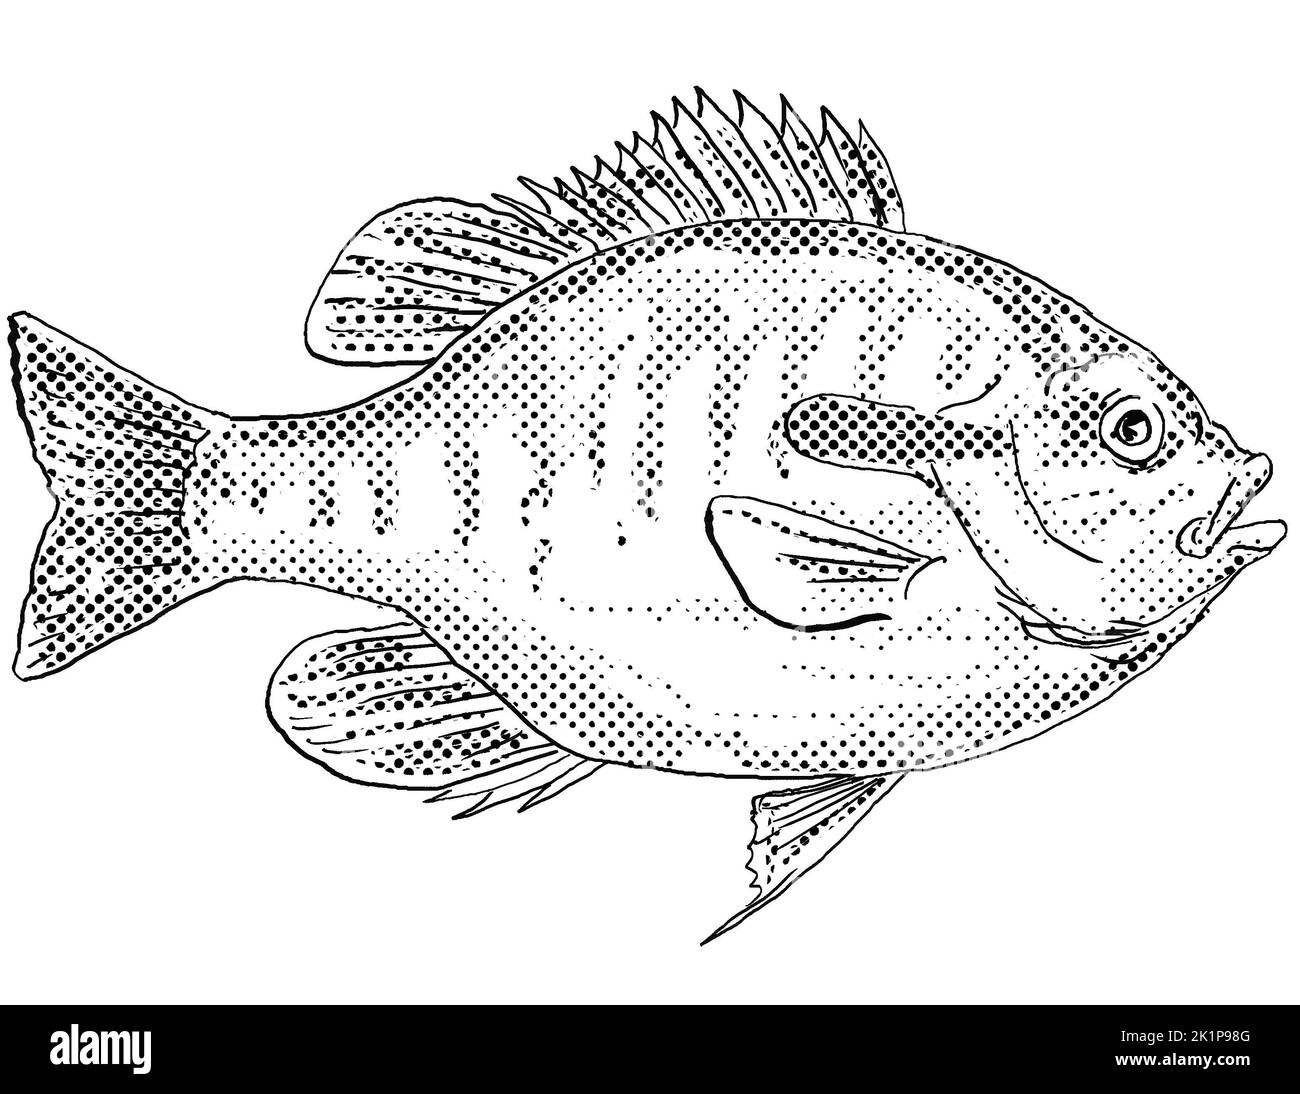 Cartoon style line drawing of a Redbreast sunfish or Lepomis auritus a freshwater fish endemic to North America with halftone dots shading on isolated Stock Photo